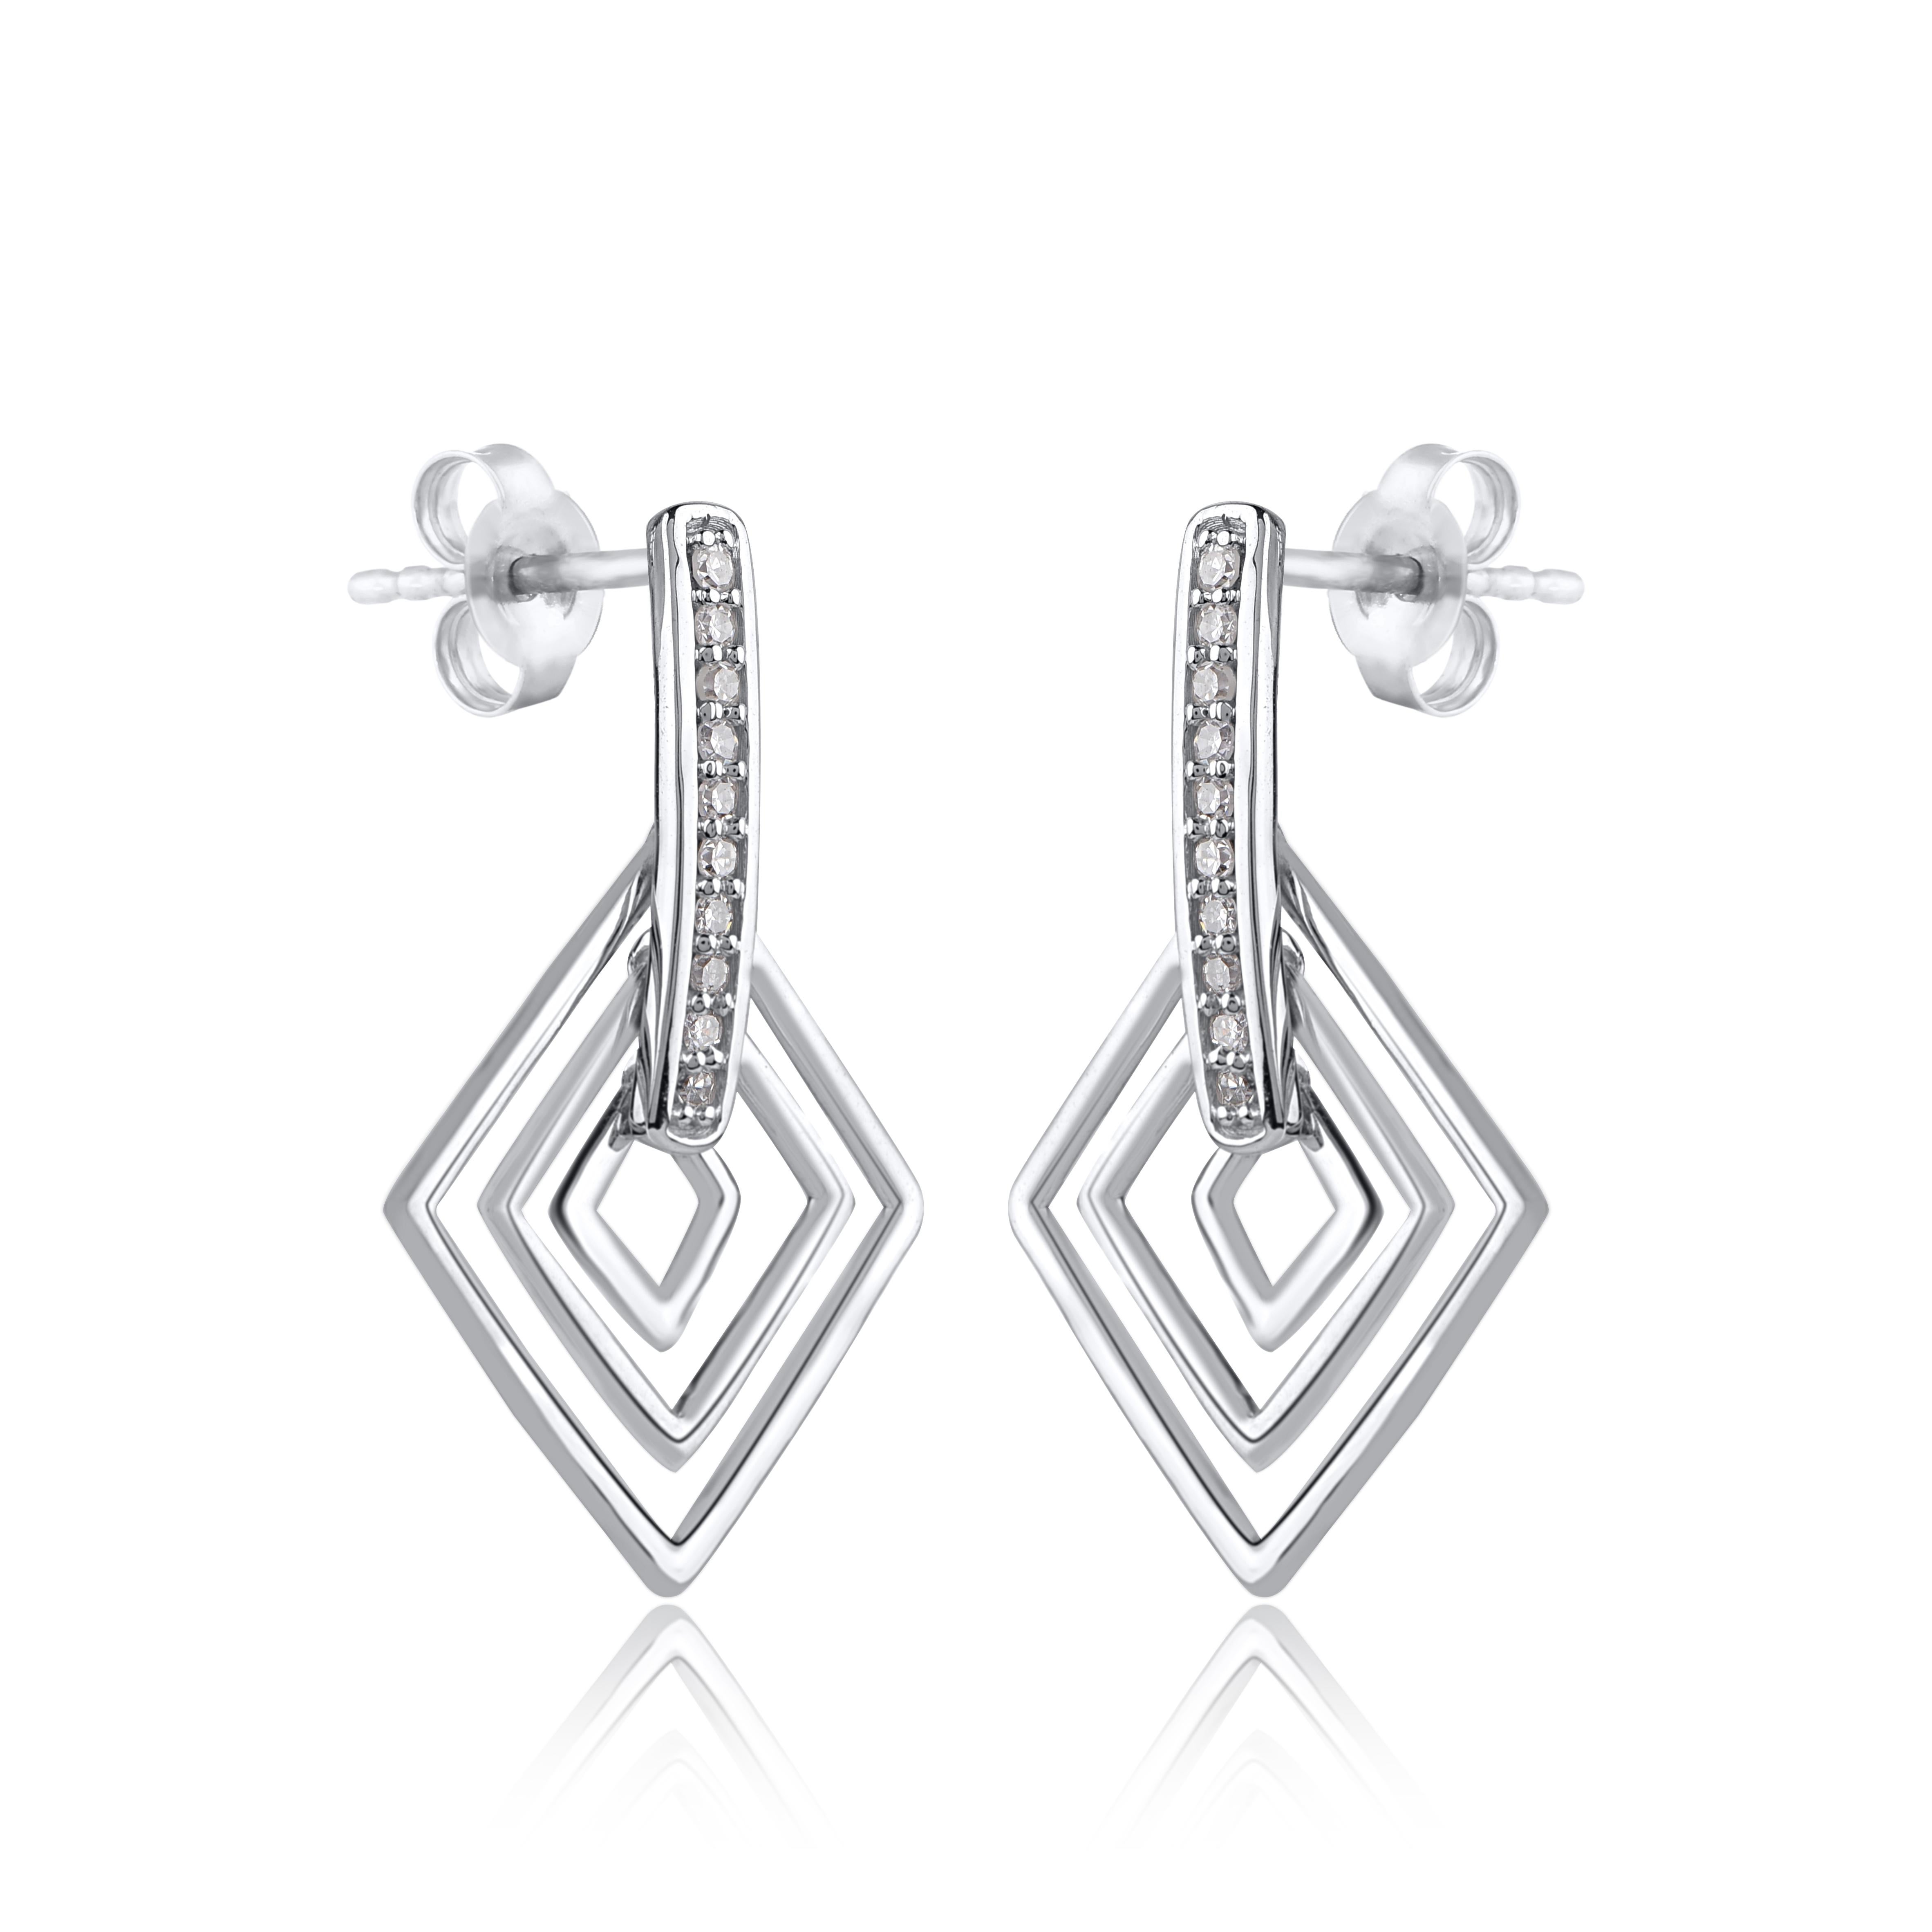 Smart and unique, these diamond dangle earrings are perfect for gifting. Made by in 14 karat white gold and accentuated with 20 round diamond in pave setting, which shines in H-I color I2 clarity. polished to a bright shine, these hoop earrings